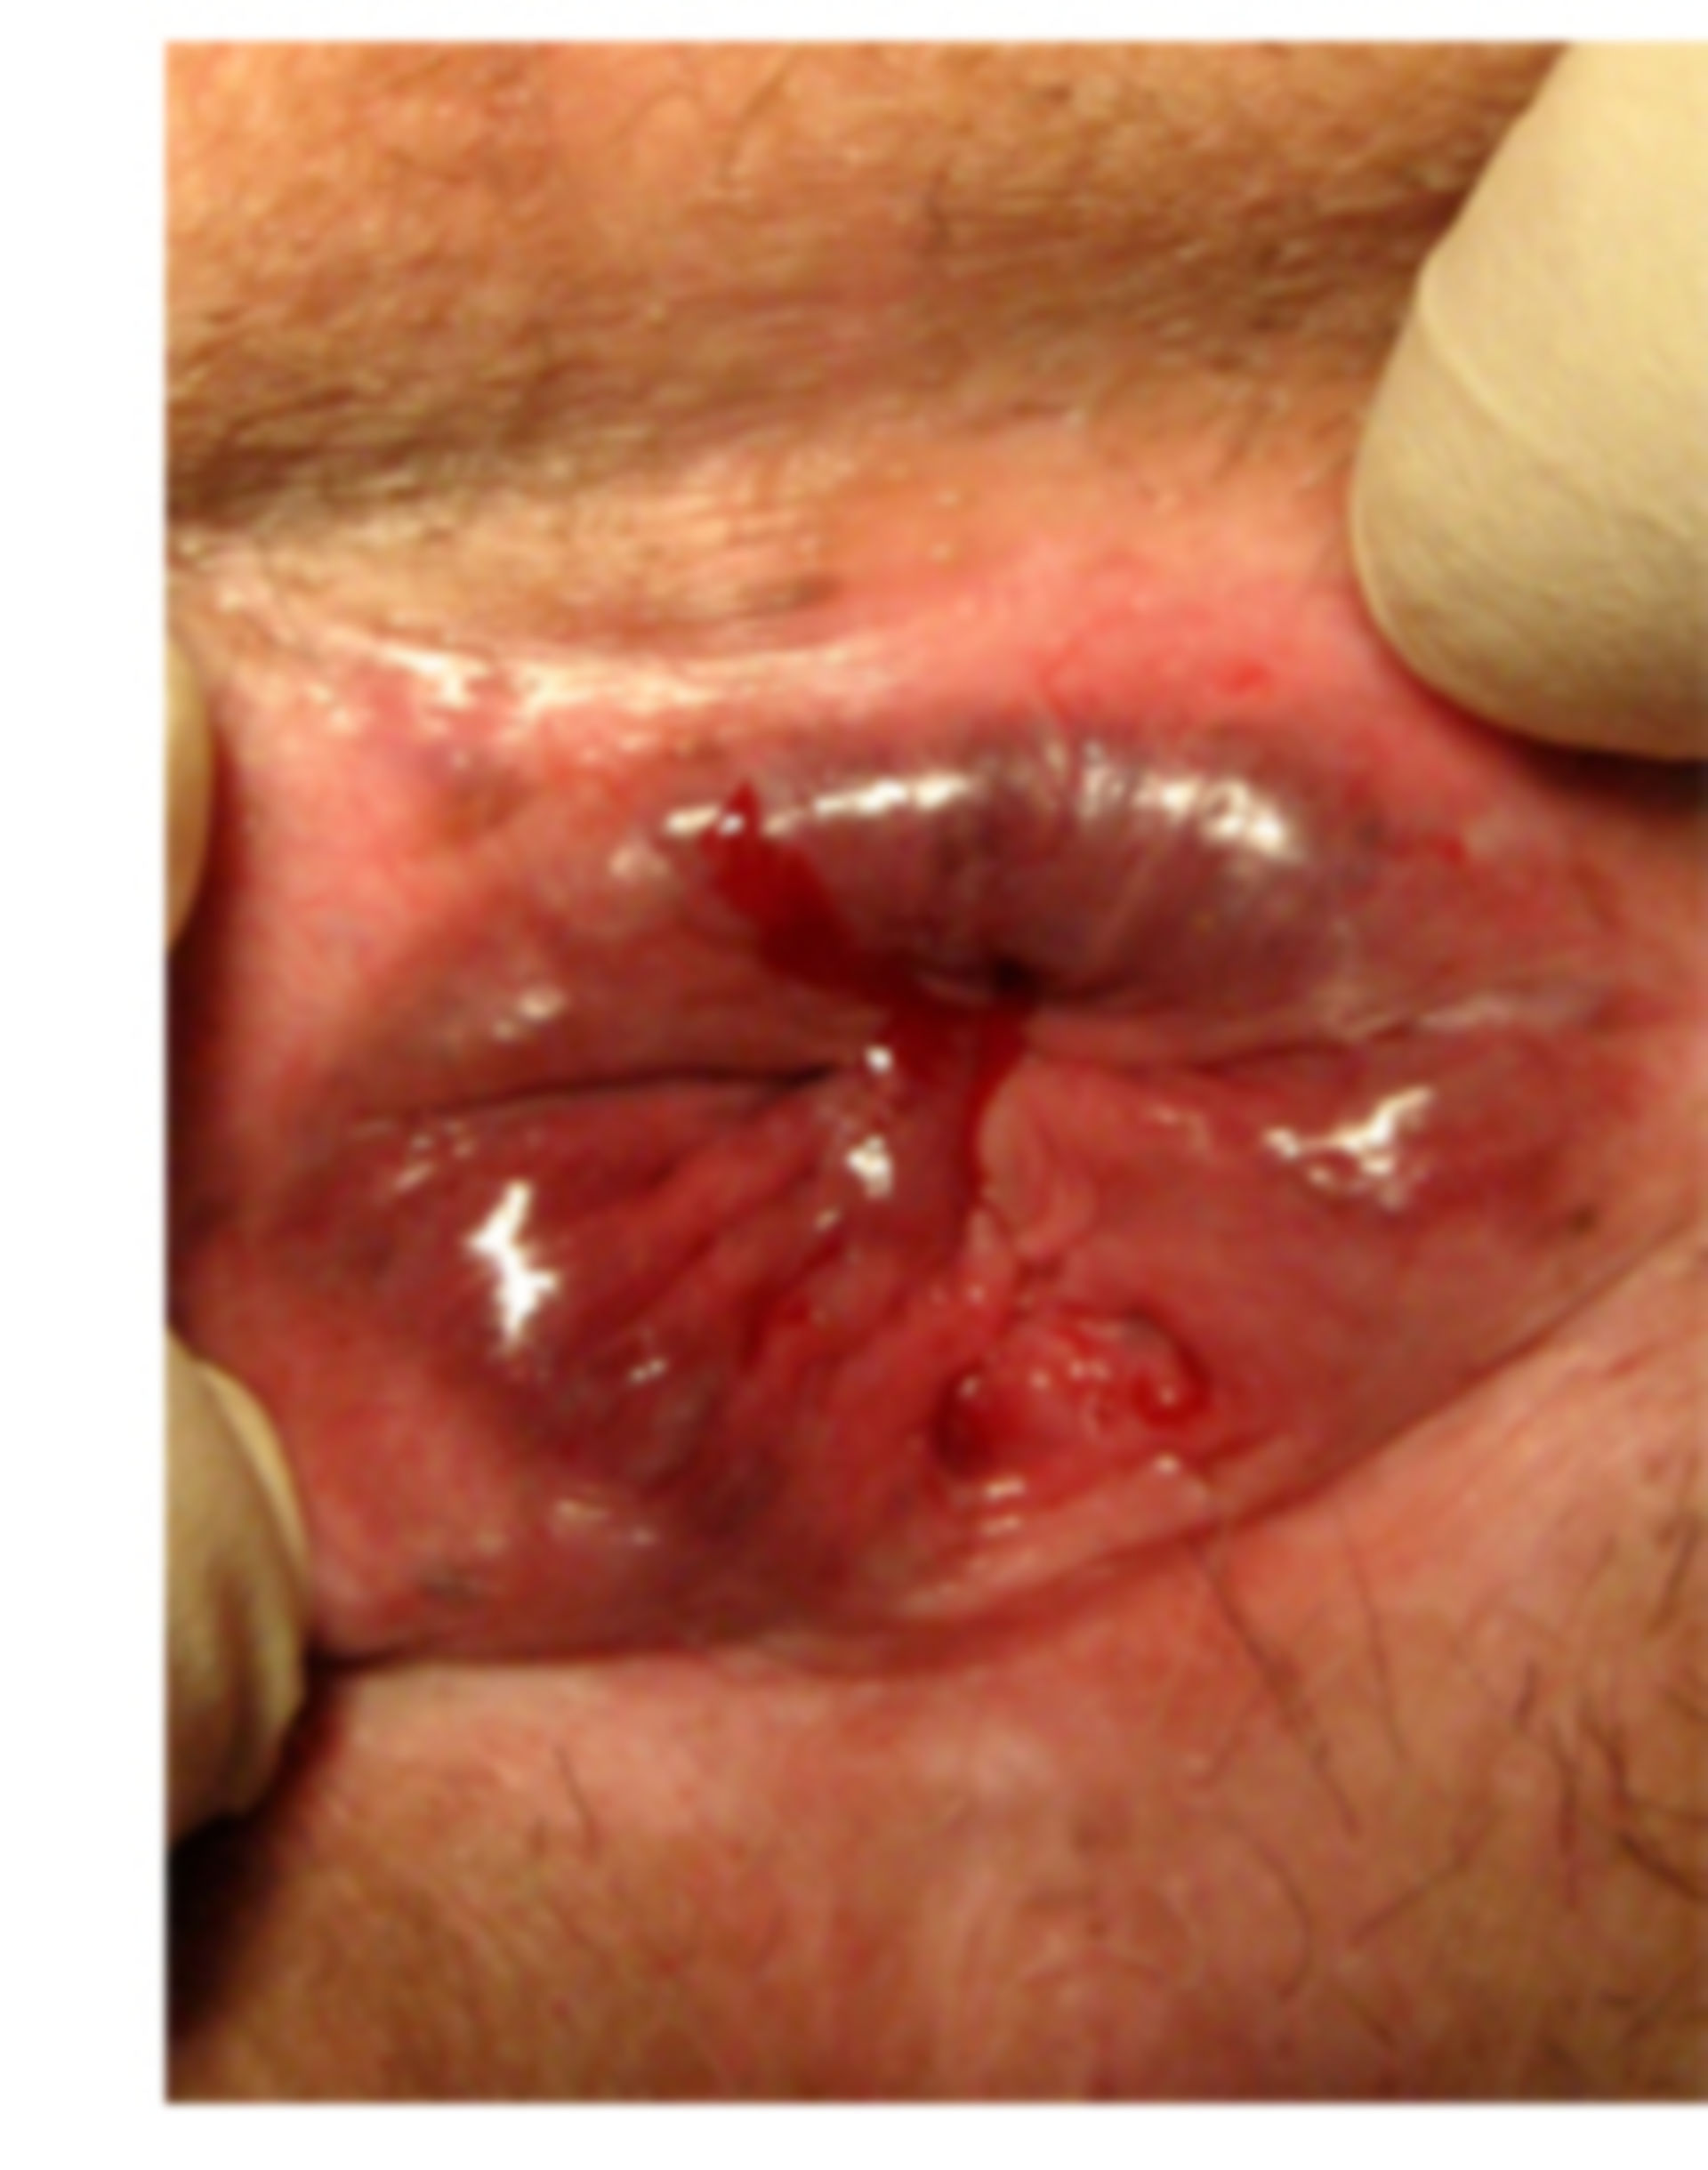 Anal fissure: acute fissure